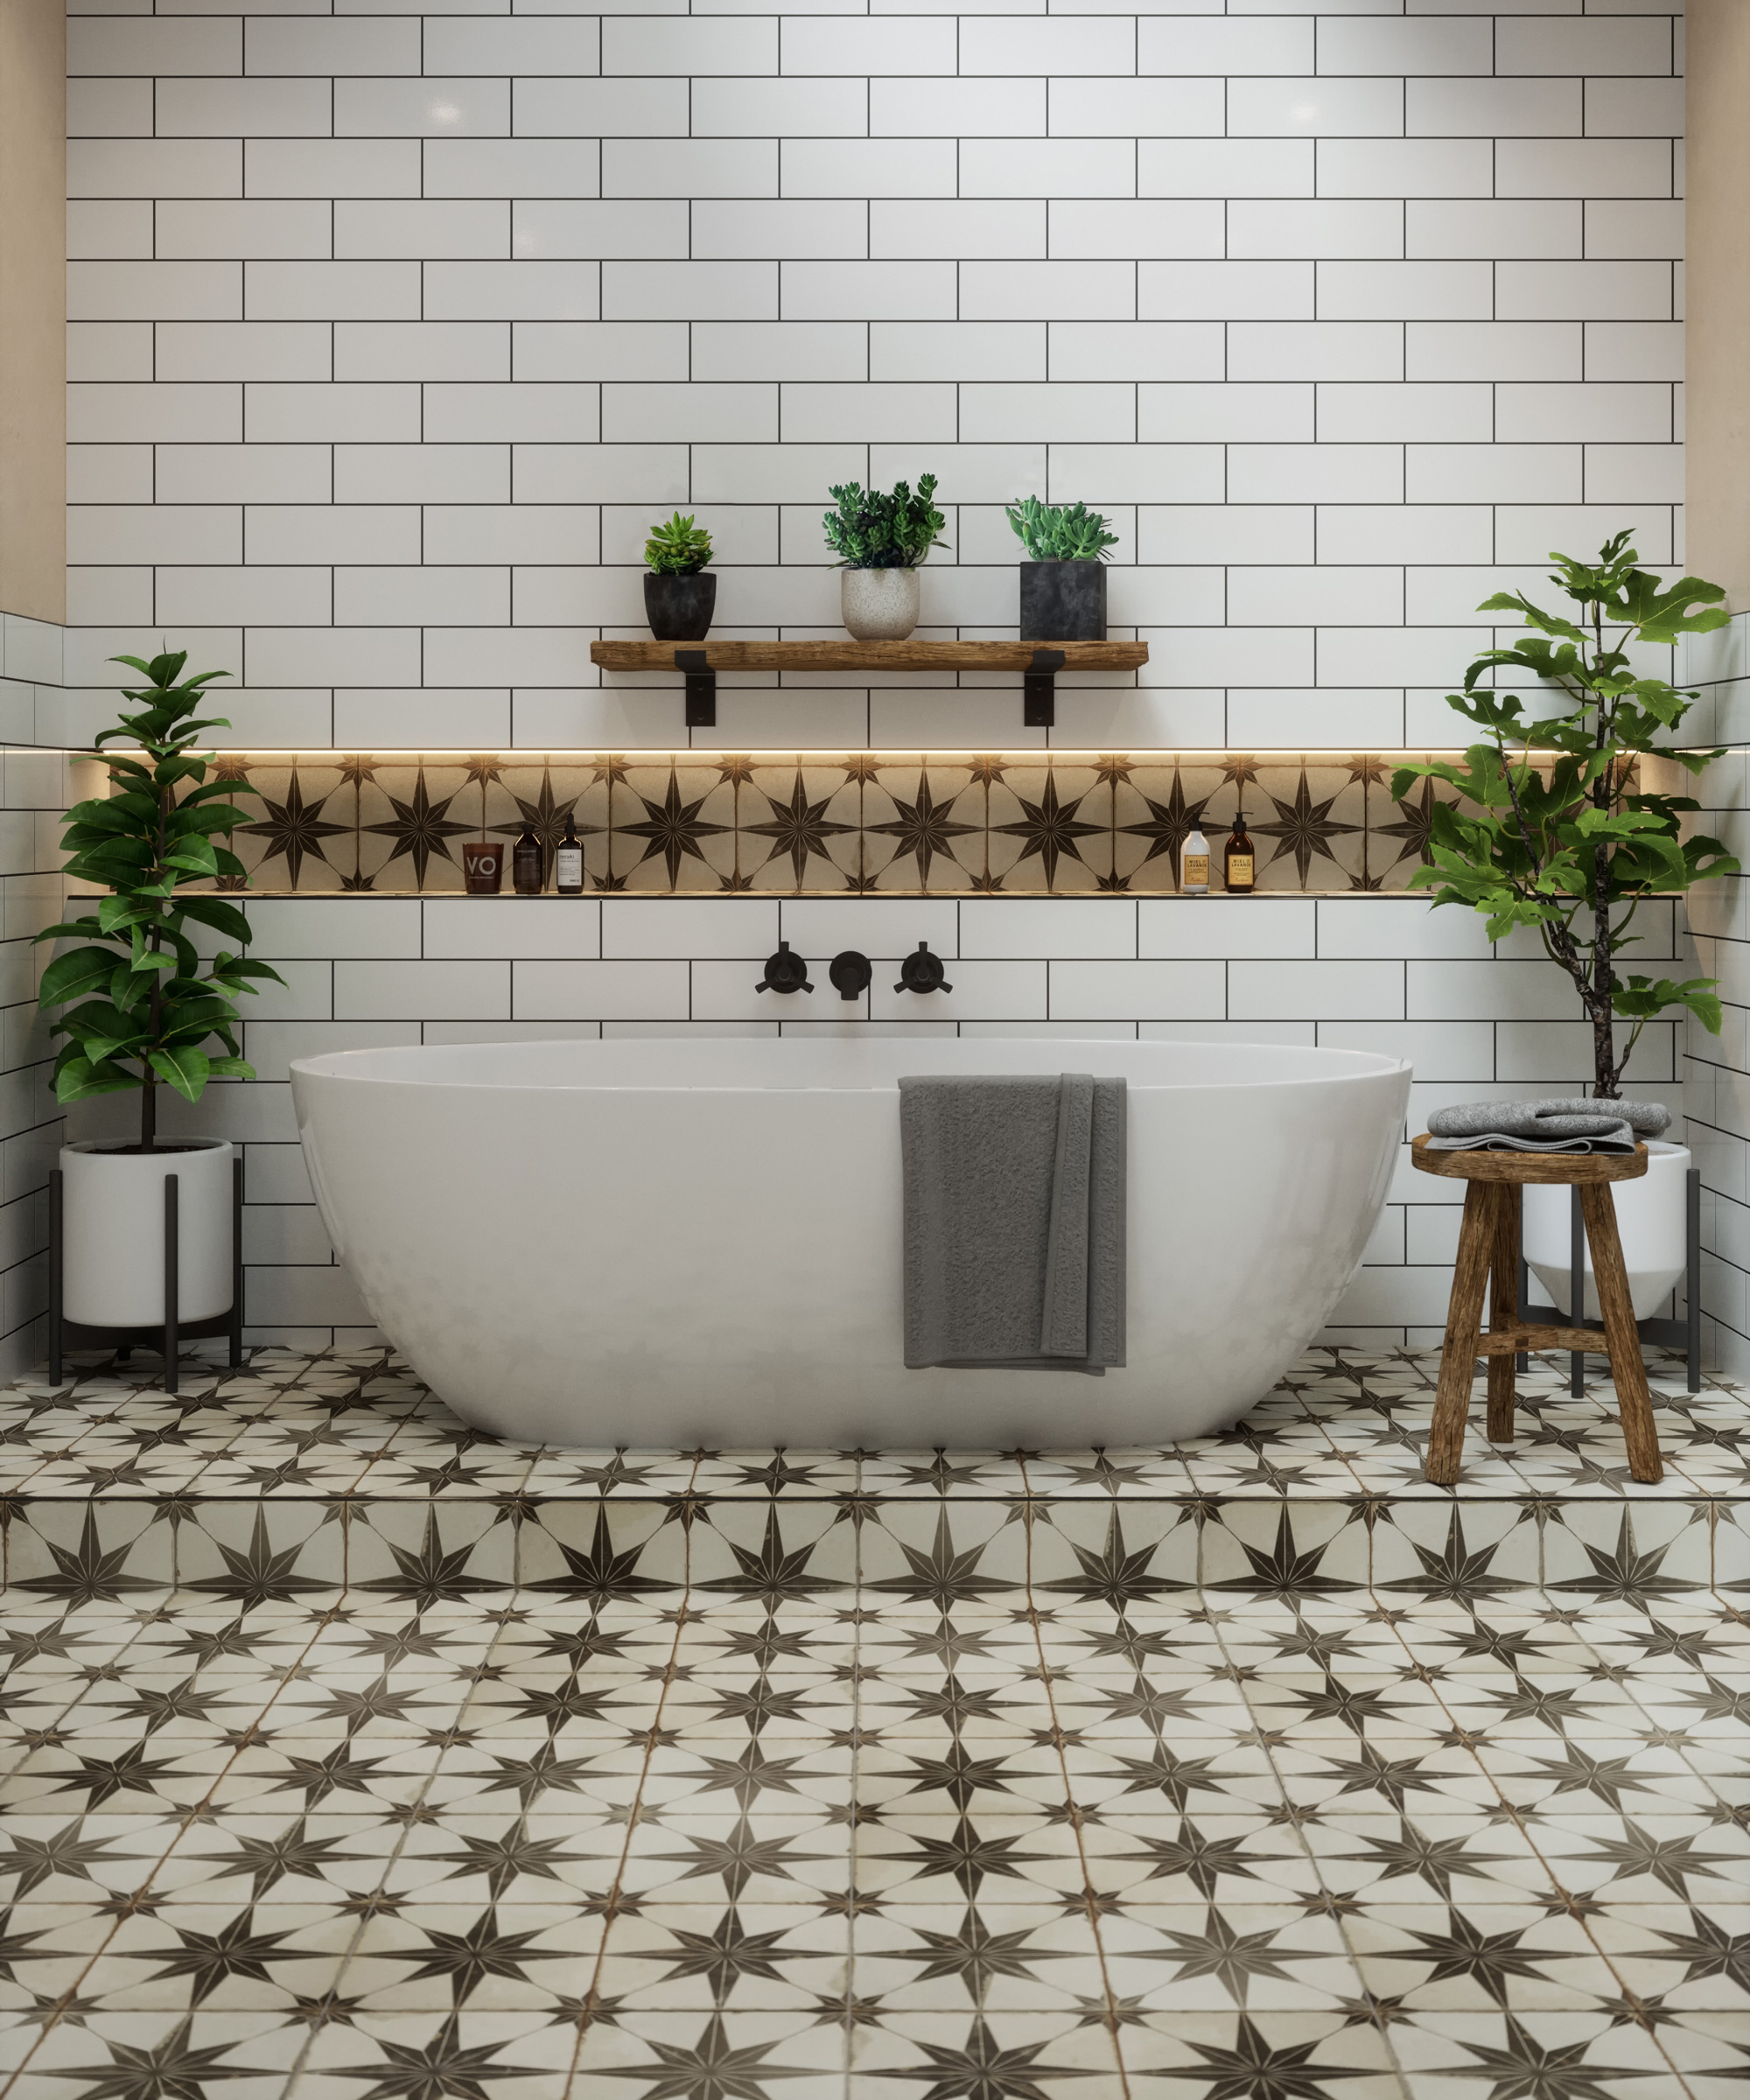 Bathroom Tile Ideas 32 New Looks To, What Colour Goes With Light Brown Bathroom Tiles